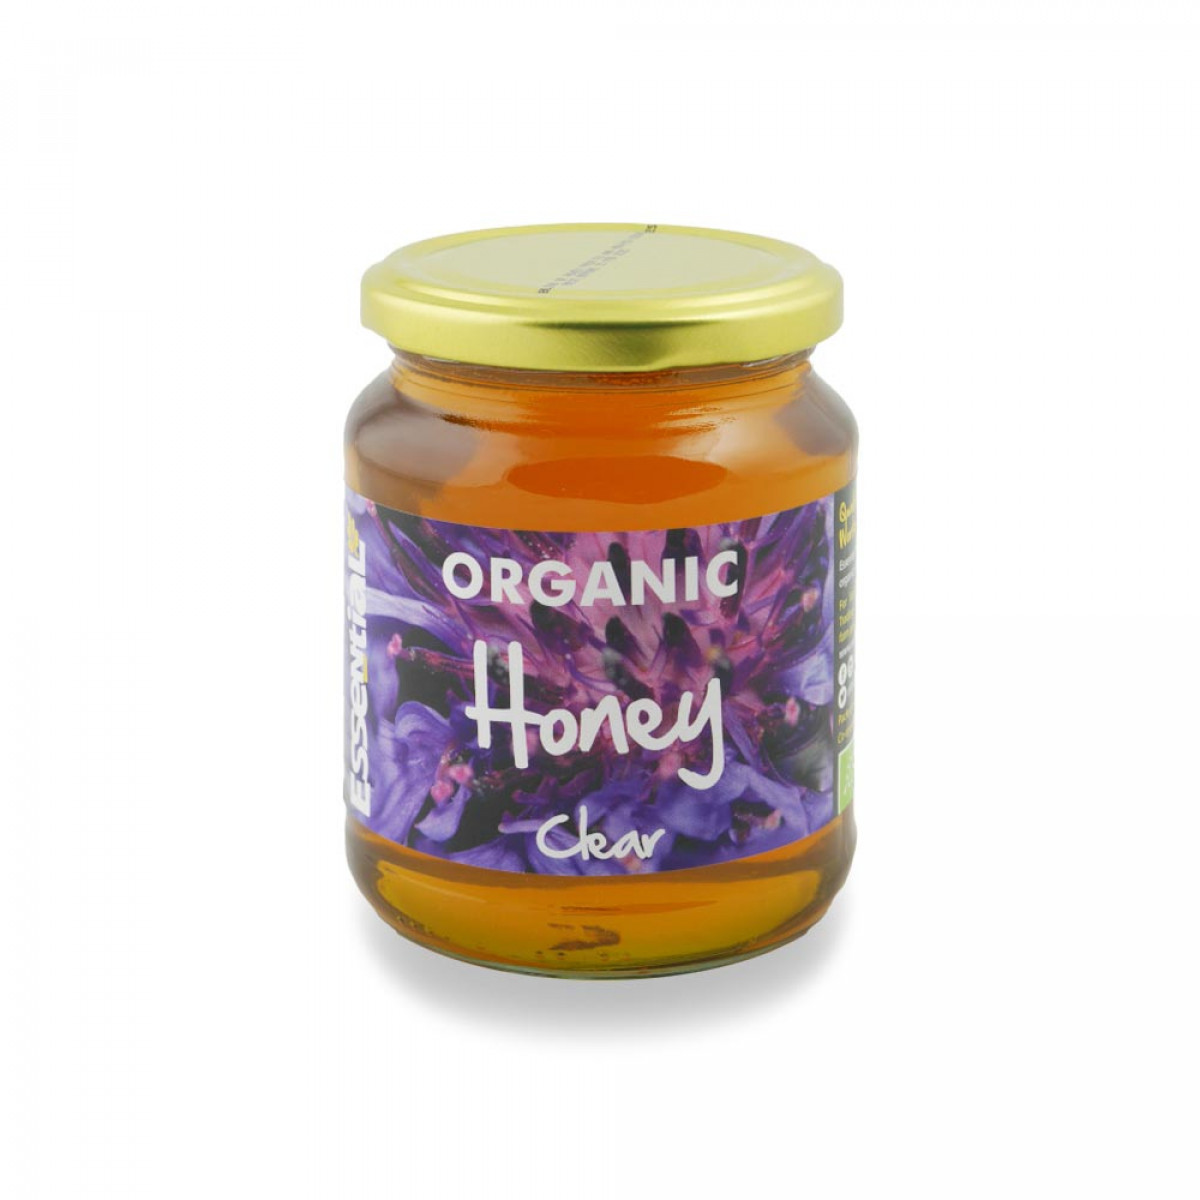 Product picture for Clear Honey